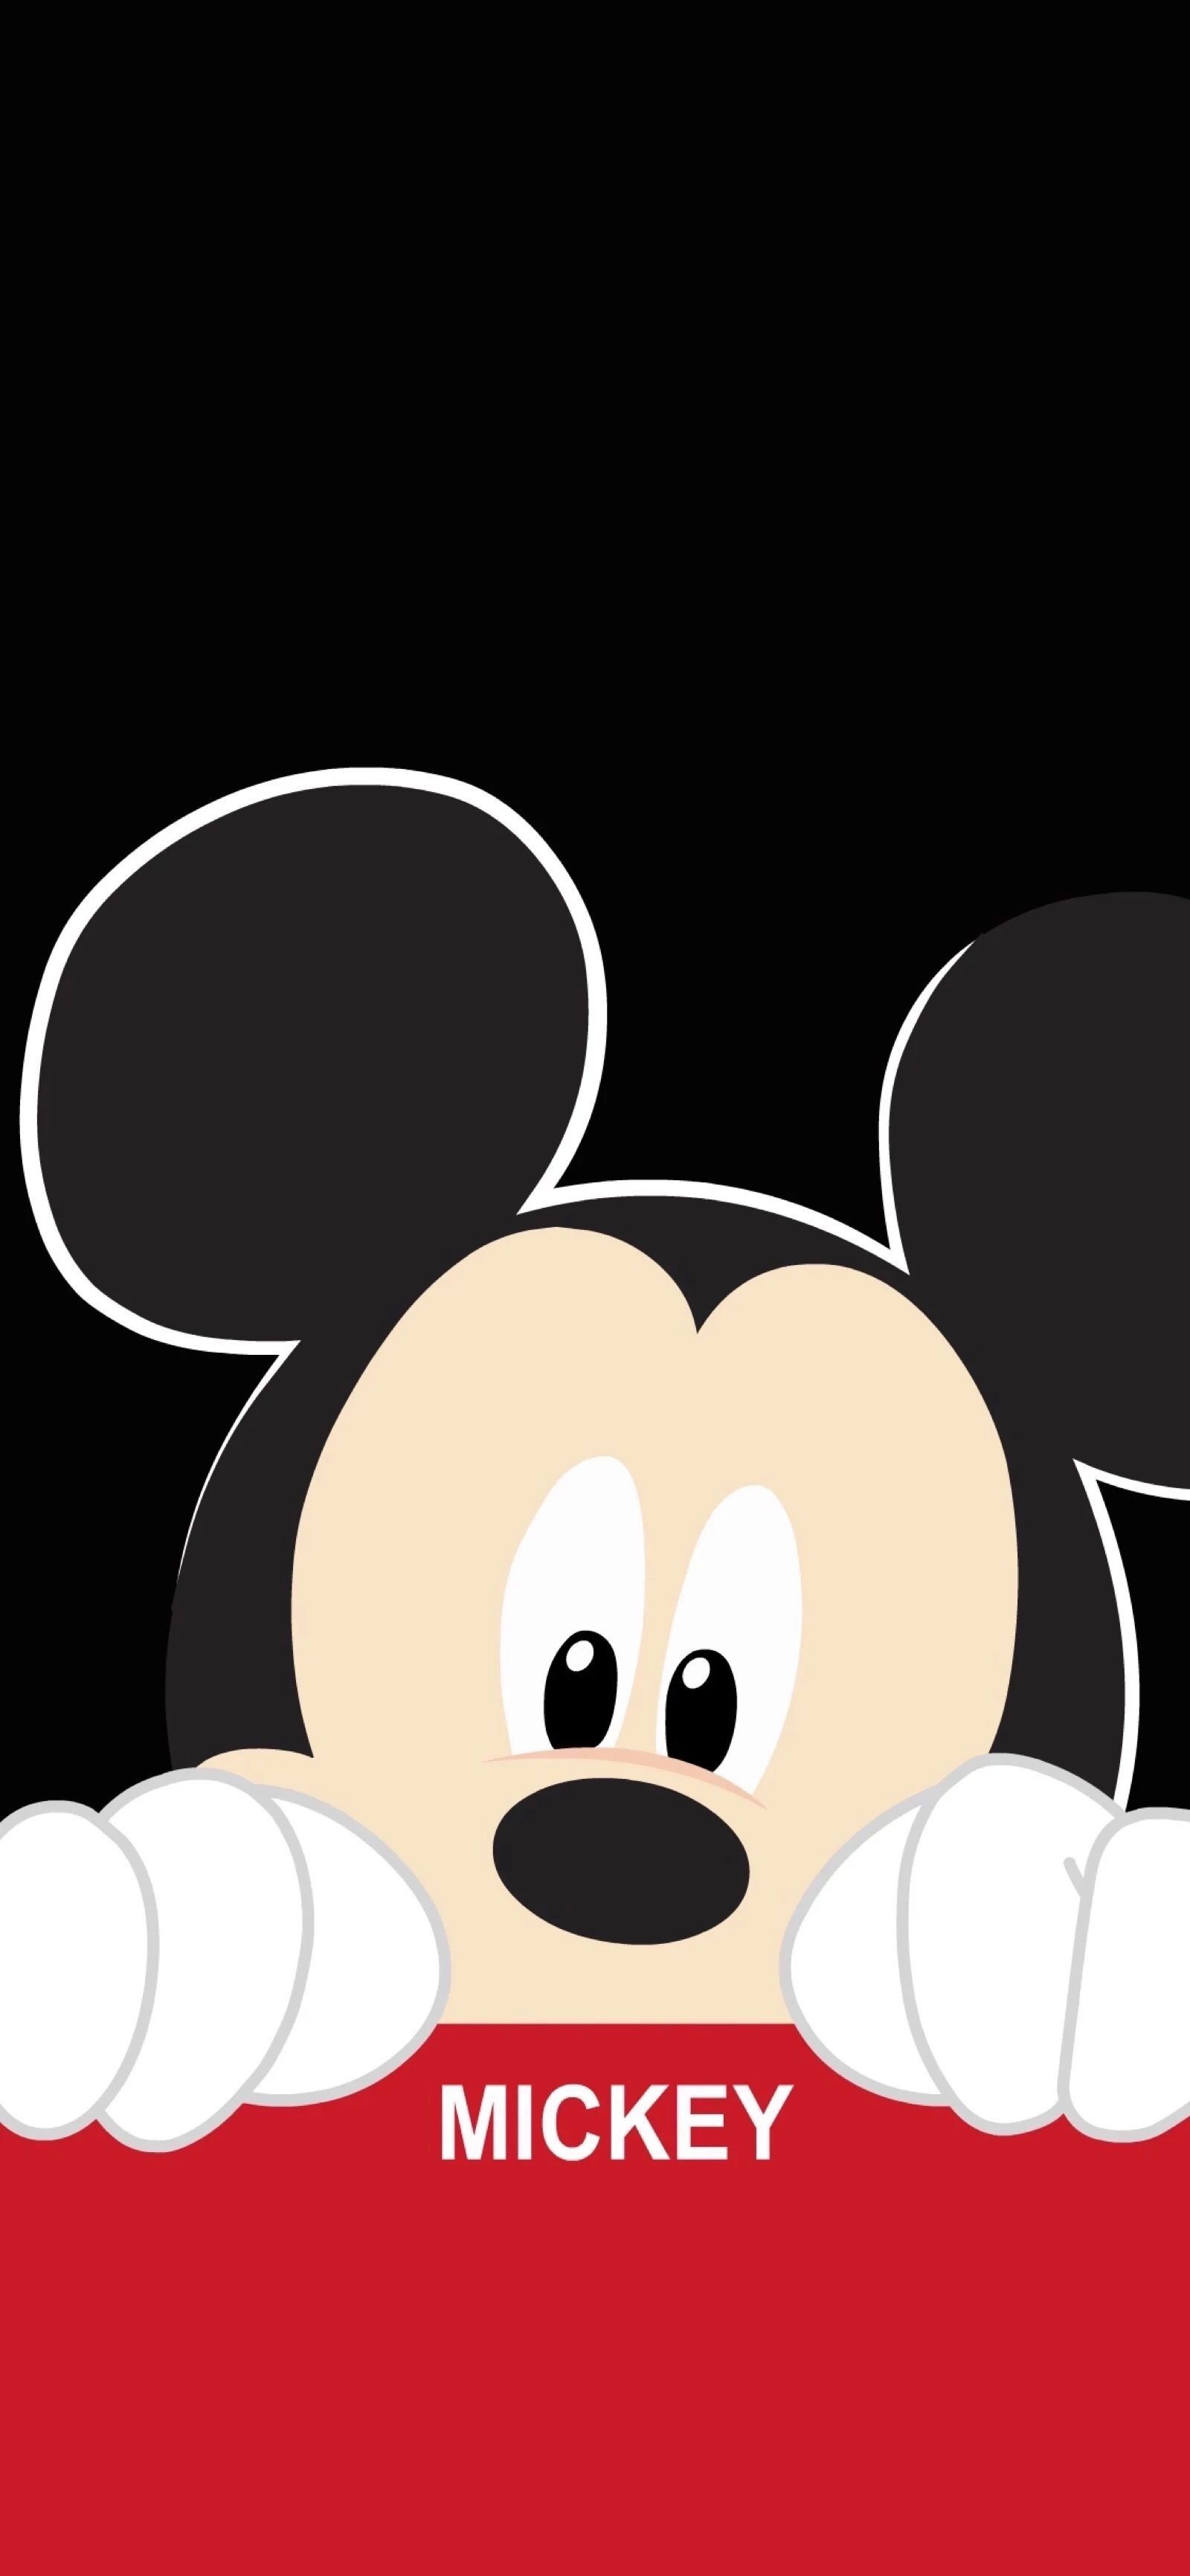 Mickey Mouse Wallpaper For iPhone 72 Image Wallpaper & Background Download